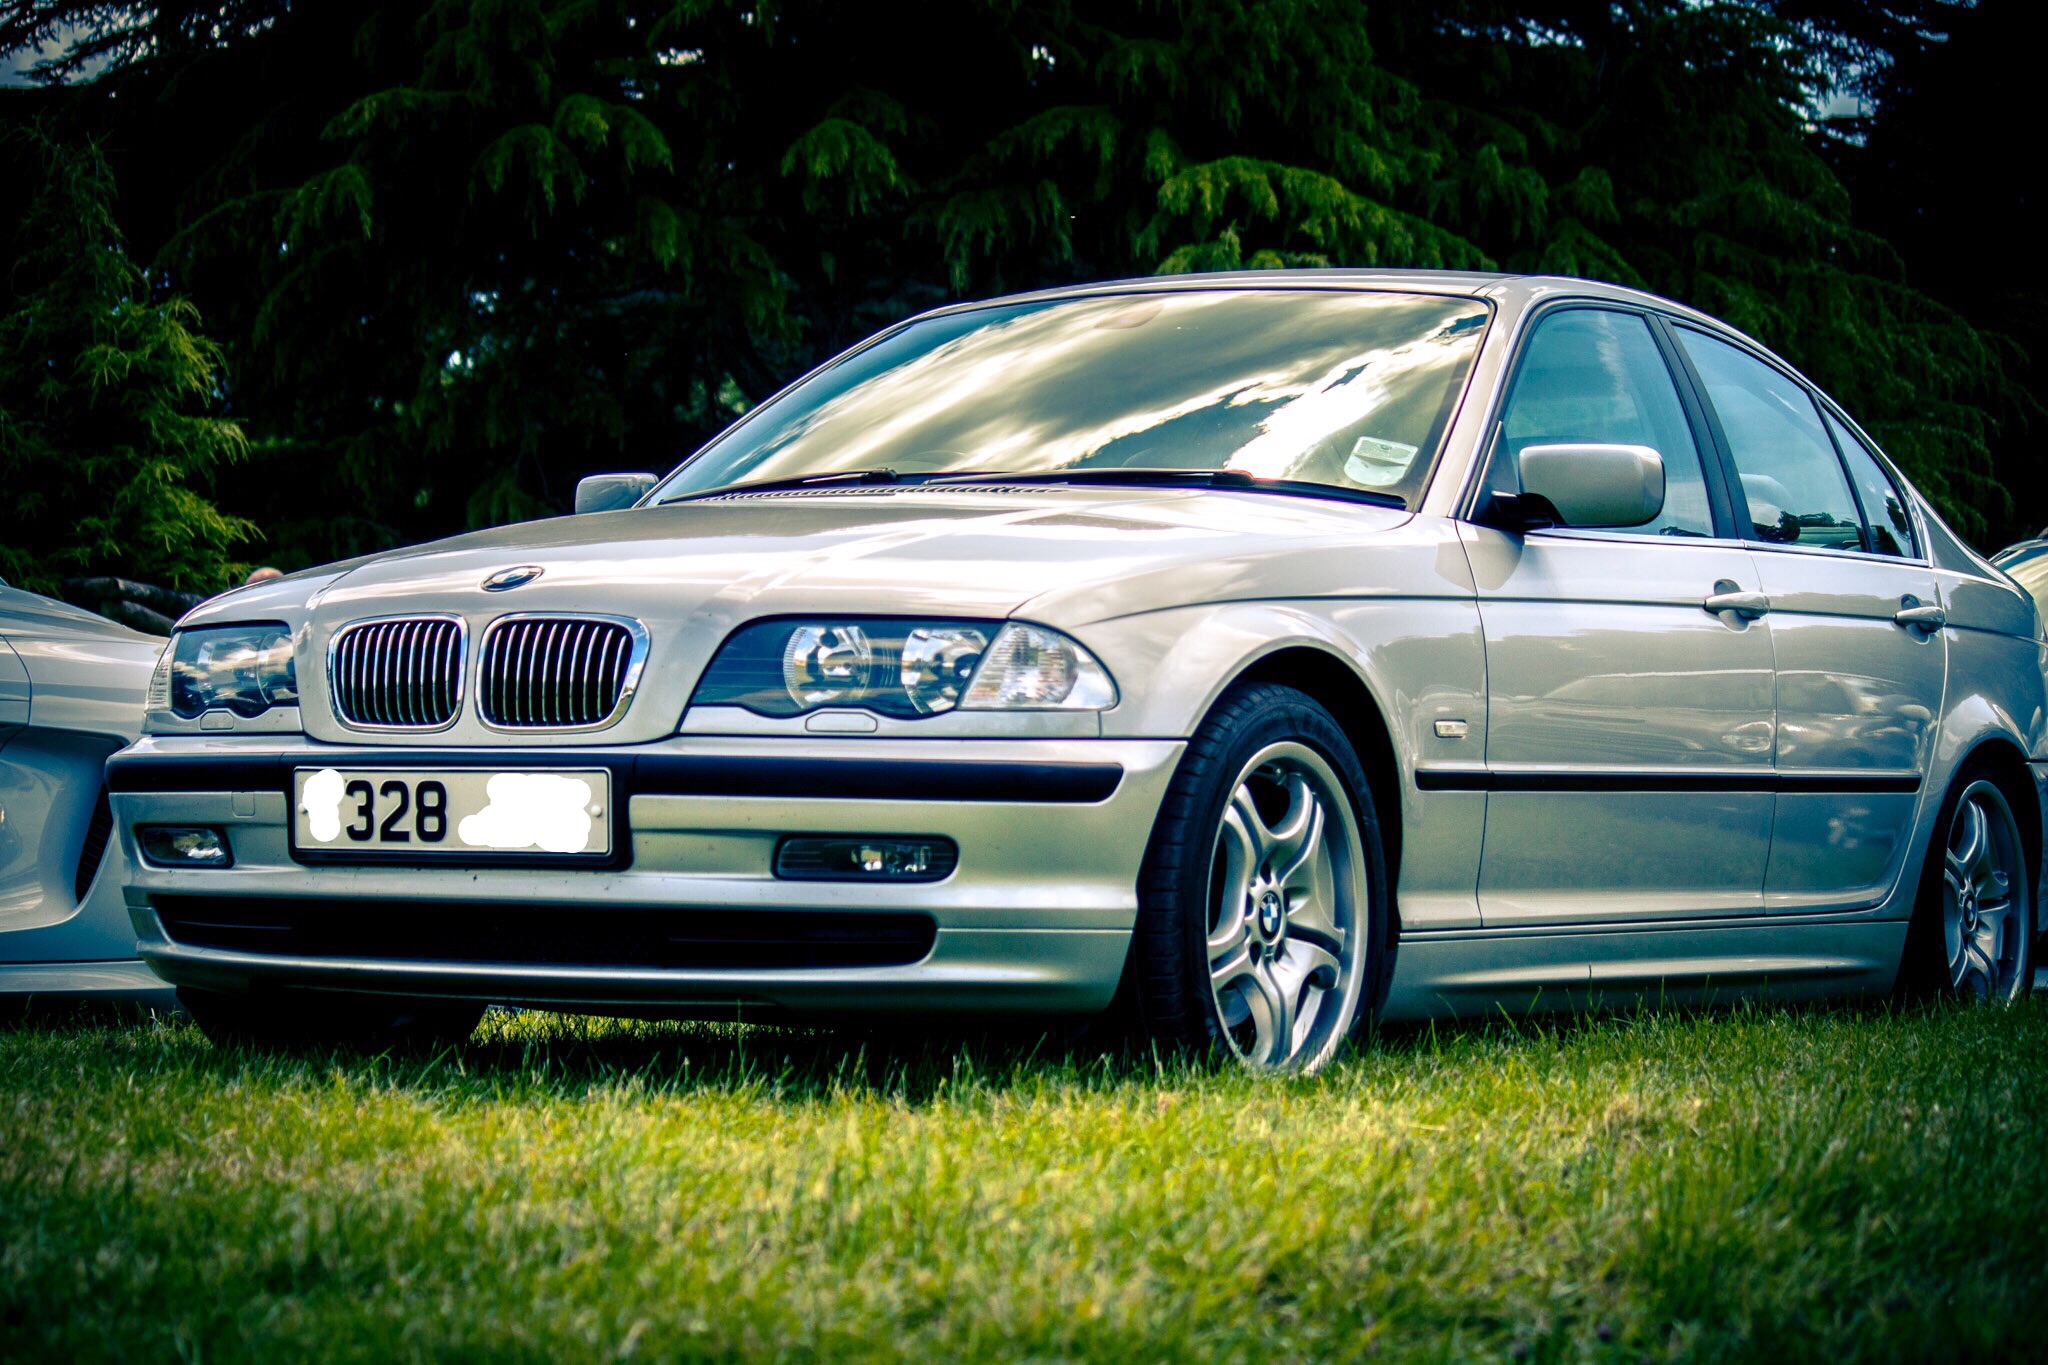 BMW 328i Coupe - 90s Inspired - Page 3 - Readers' Cars - PistonHeads